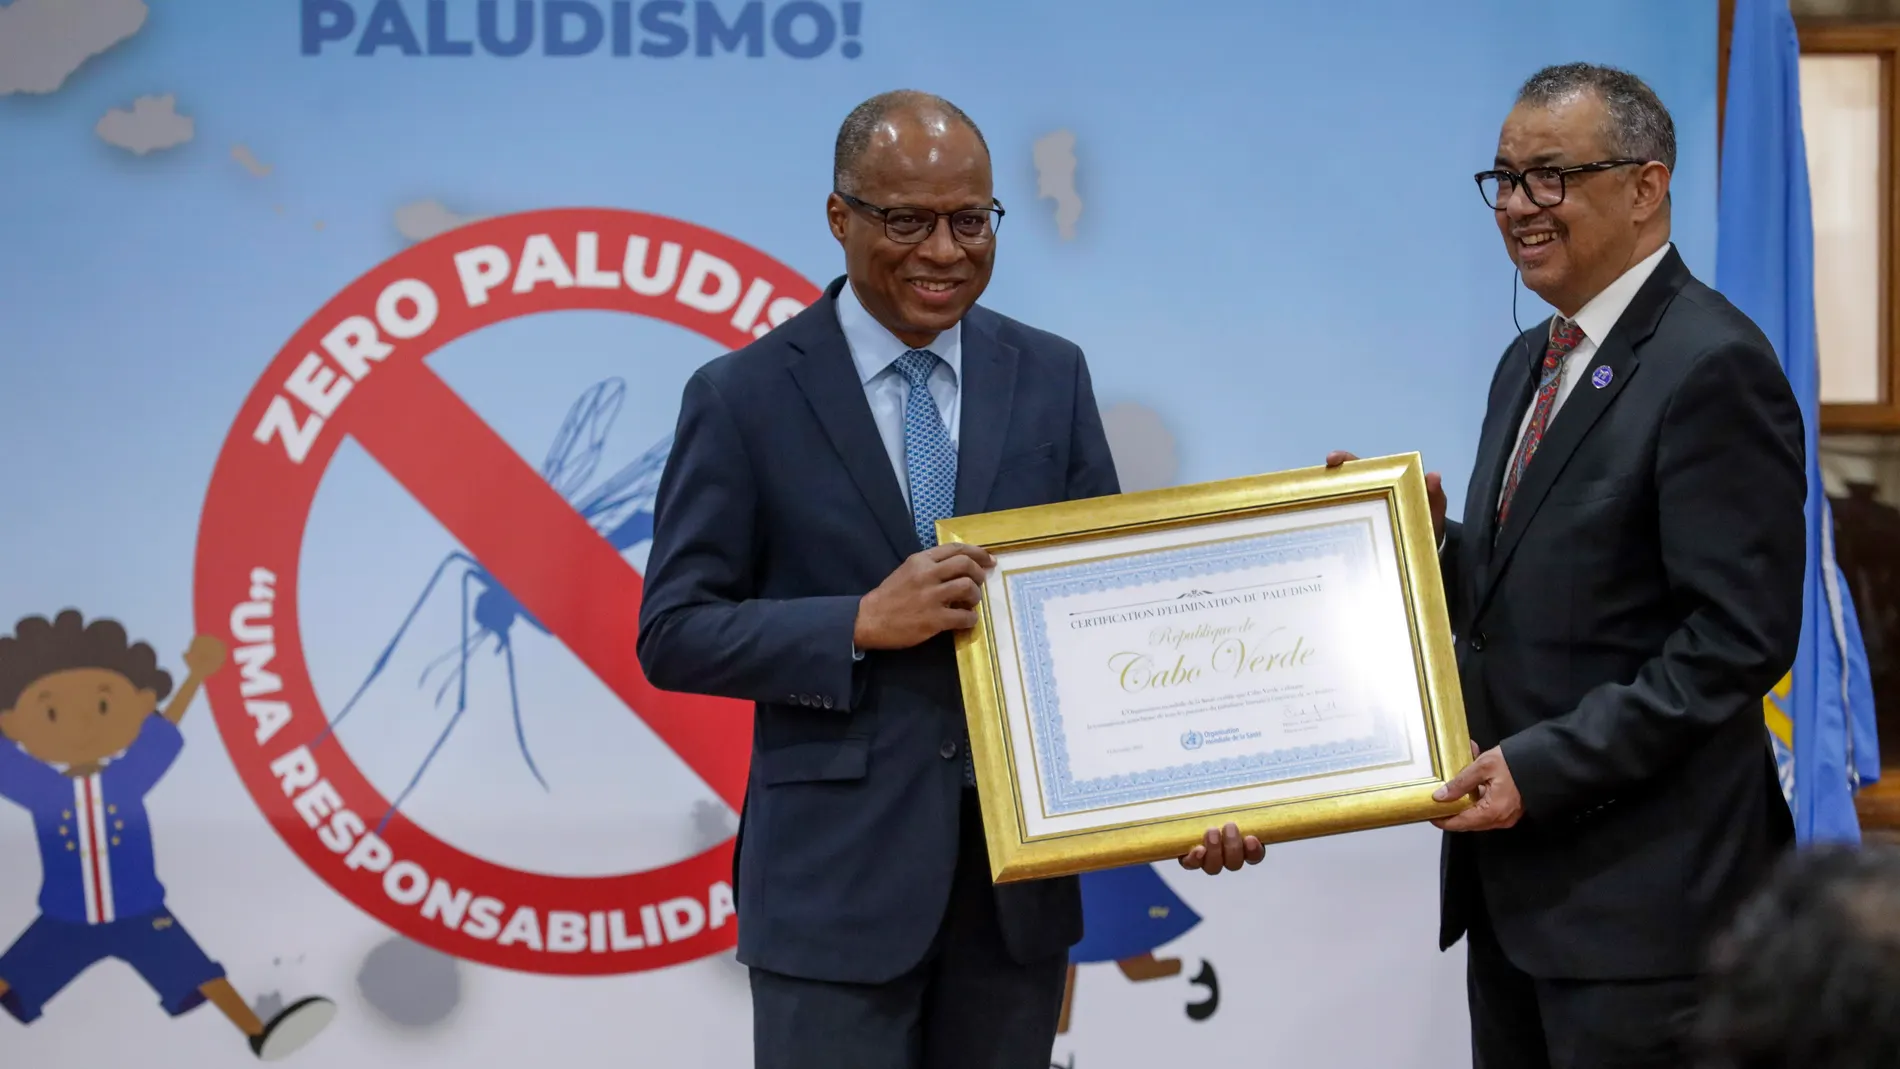 Praia (Cape Verde), 12/01/2024.- Cape Verde's Prime Minister Ulisses Correia e Silva (L) receives the malaria-free country certificate from the Director-General of the World Health Organization (WHO) Tedros Adhanom Ghebreyesus (R), at Praia, Santiago Island, Cape Verde, 12 January 2024. Cape Verde is the third country to be certified in the WHO's African region, joining Mauritius and Algeria, which were certified in 1973 and 2019, respectively. (Cabo Verde, Mauricio) EFE/EPA/ELTON MONTEIRO 